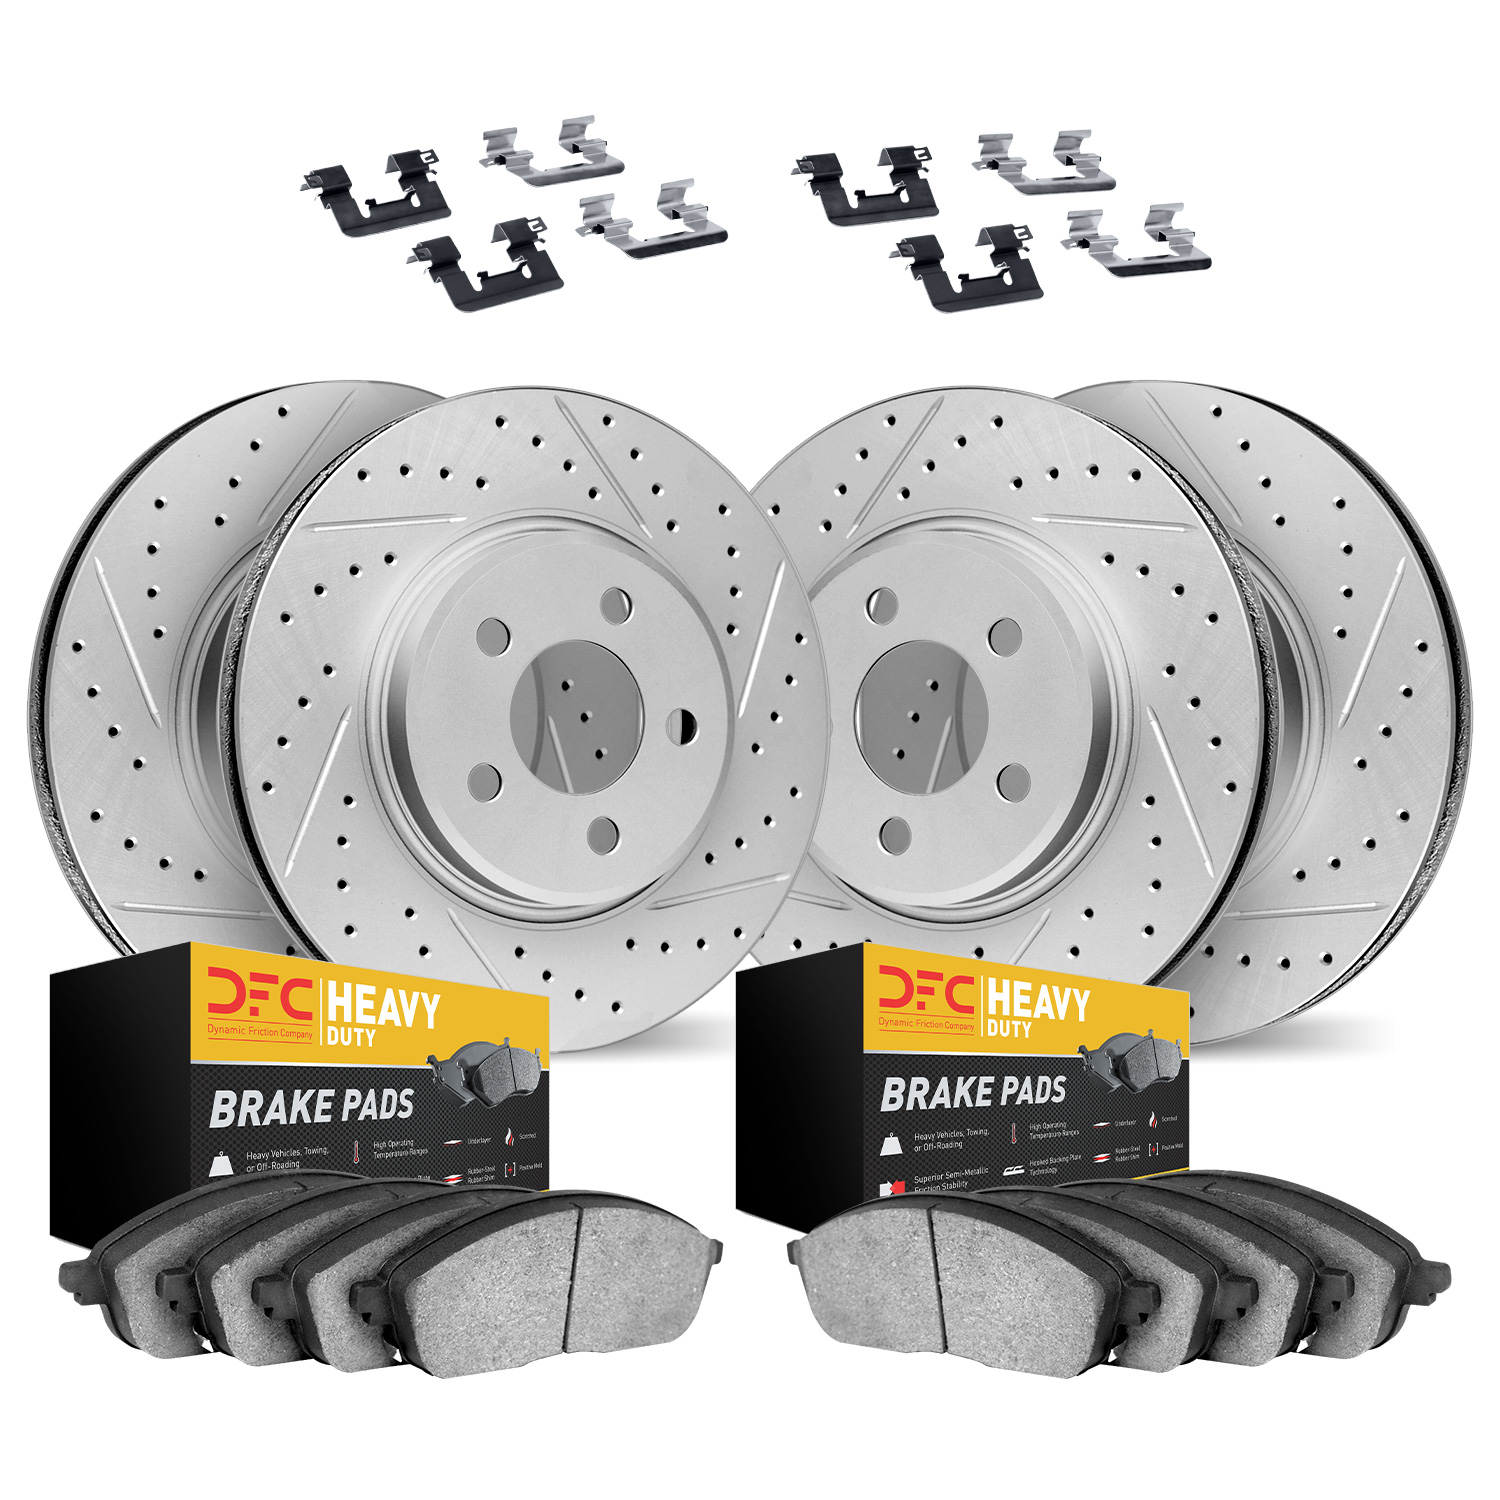 2214-40067 Geoperformance Drilled/Slotted Rotors w/Heavy-Duty Pads Kit & Hardware, 2004-2004 Mopar, Position: Front and Rear